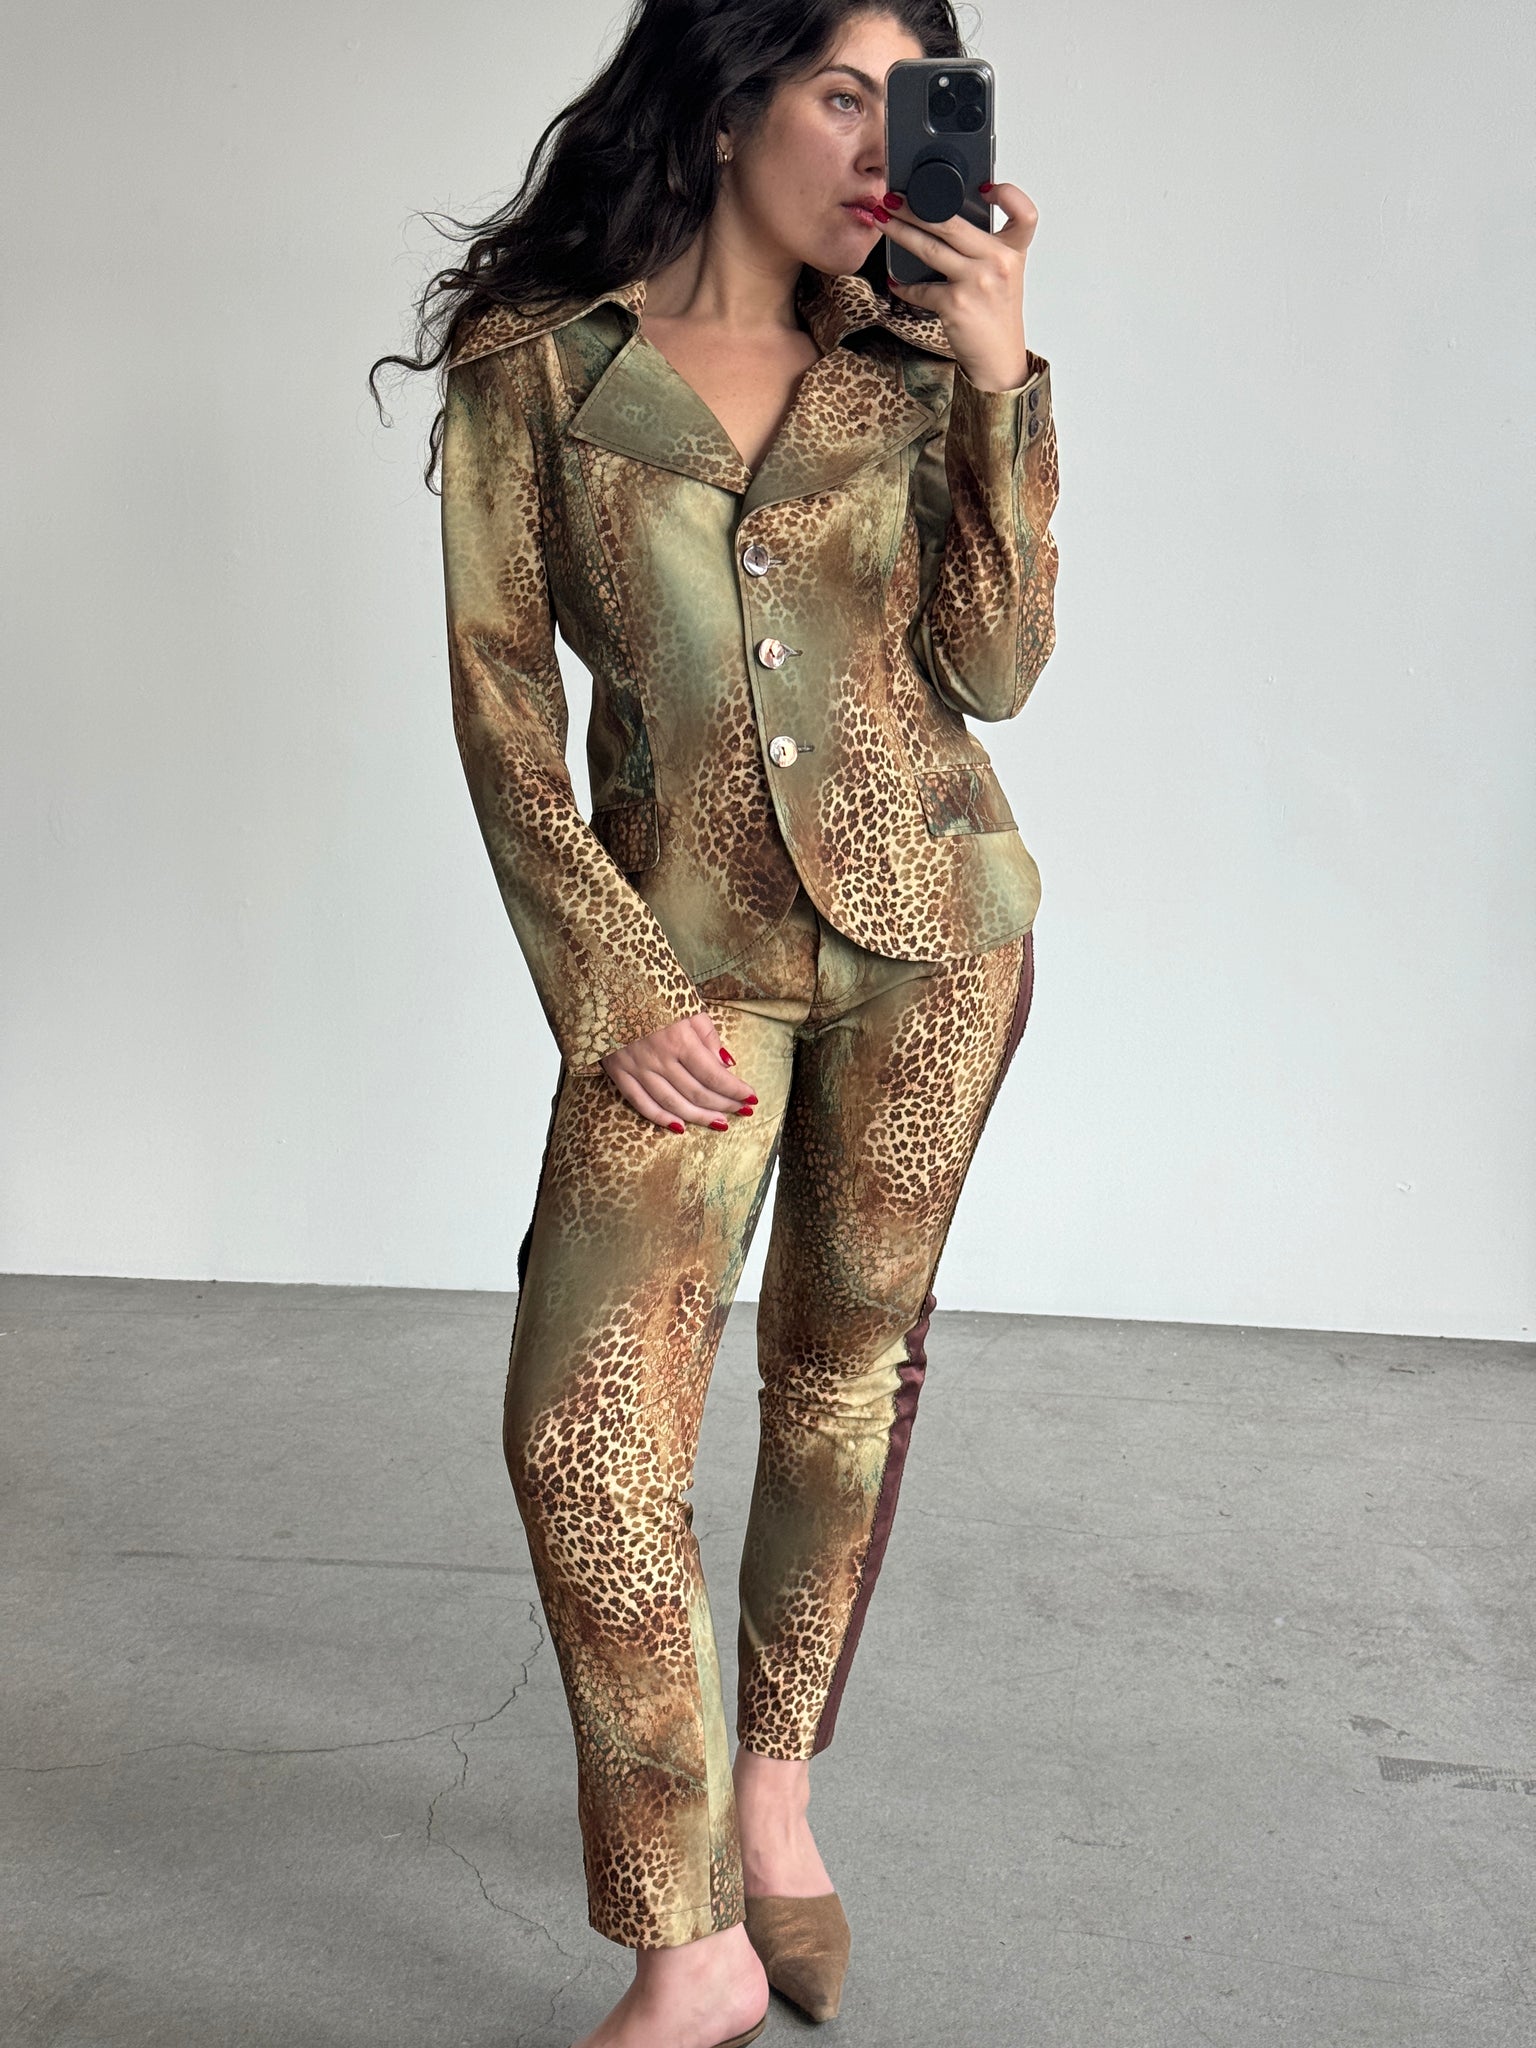 ROCCO BAROCCO ANIMAL PRINT TWO PIECE SUIT